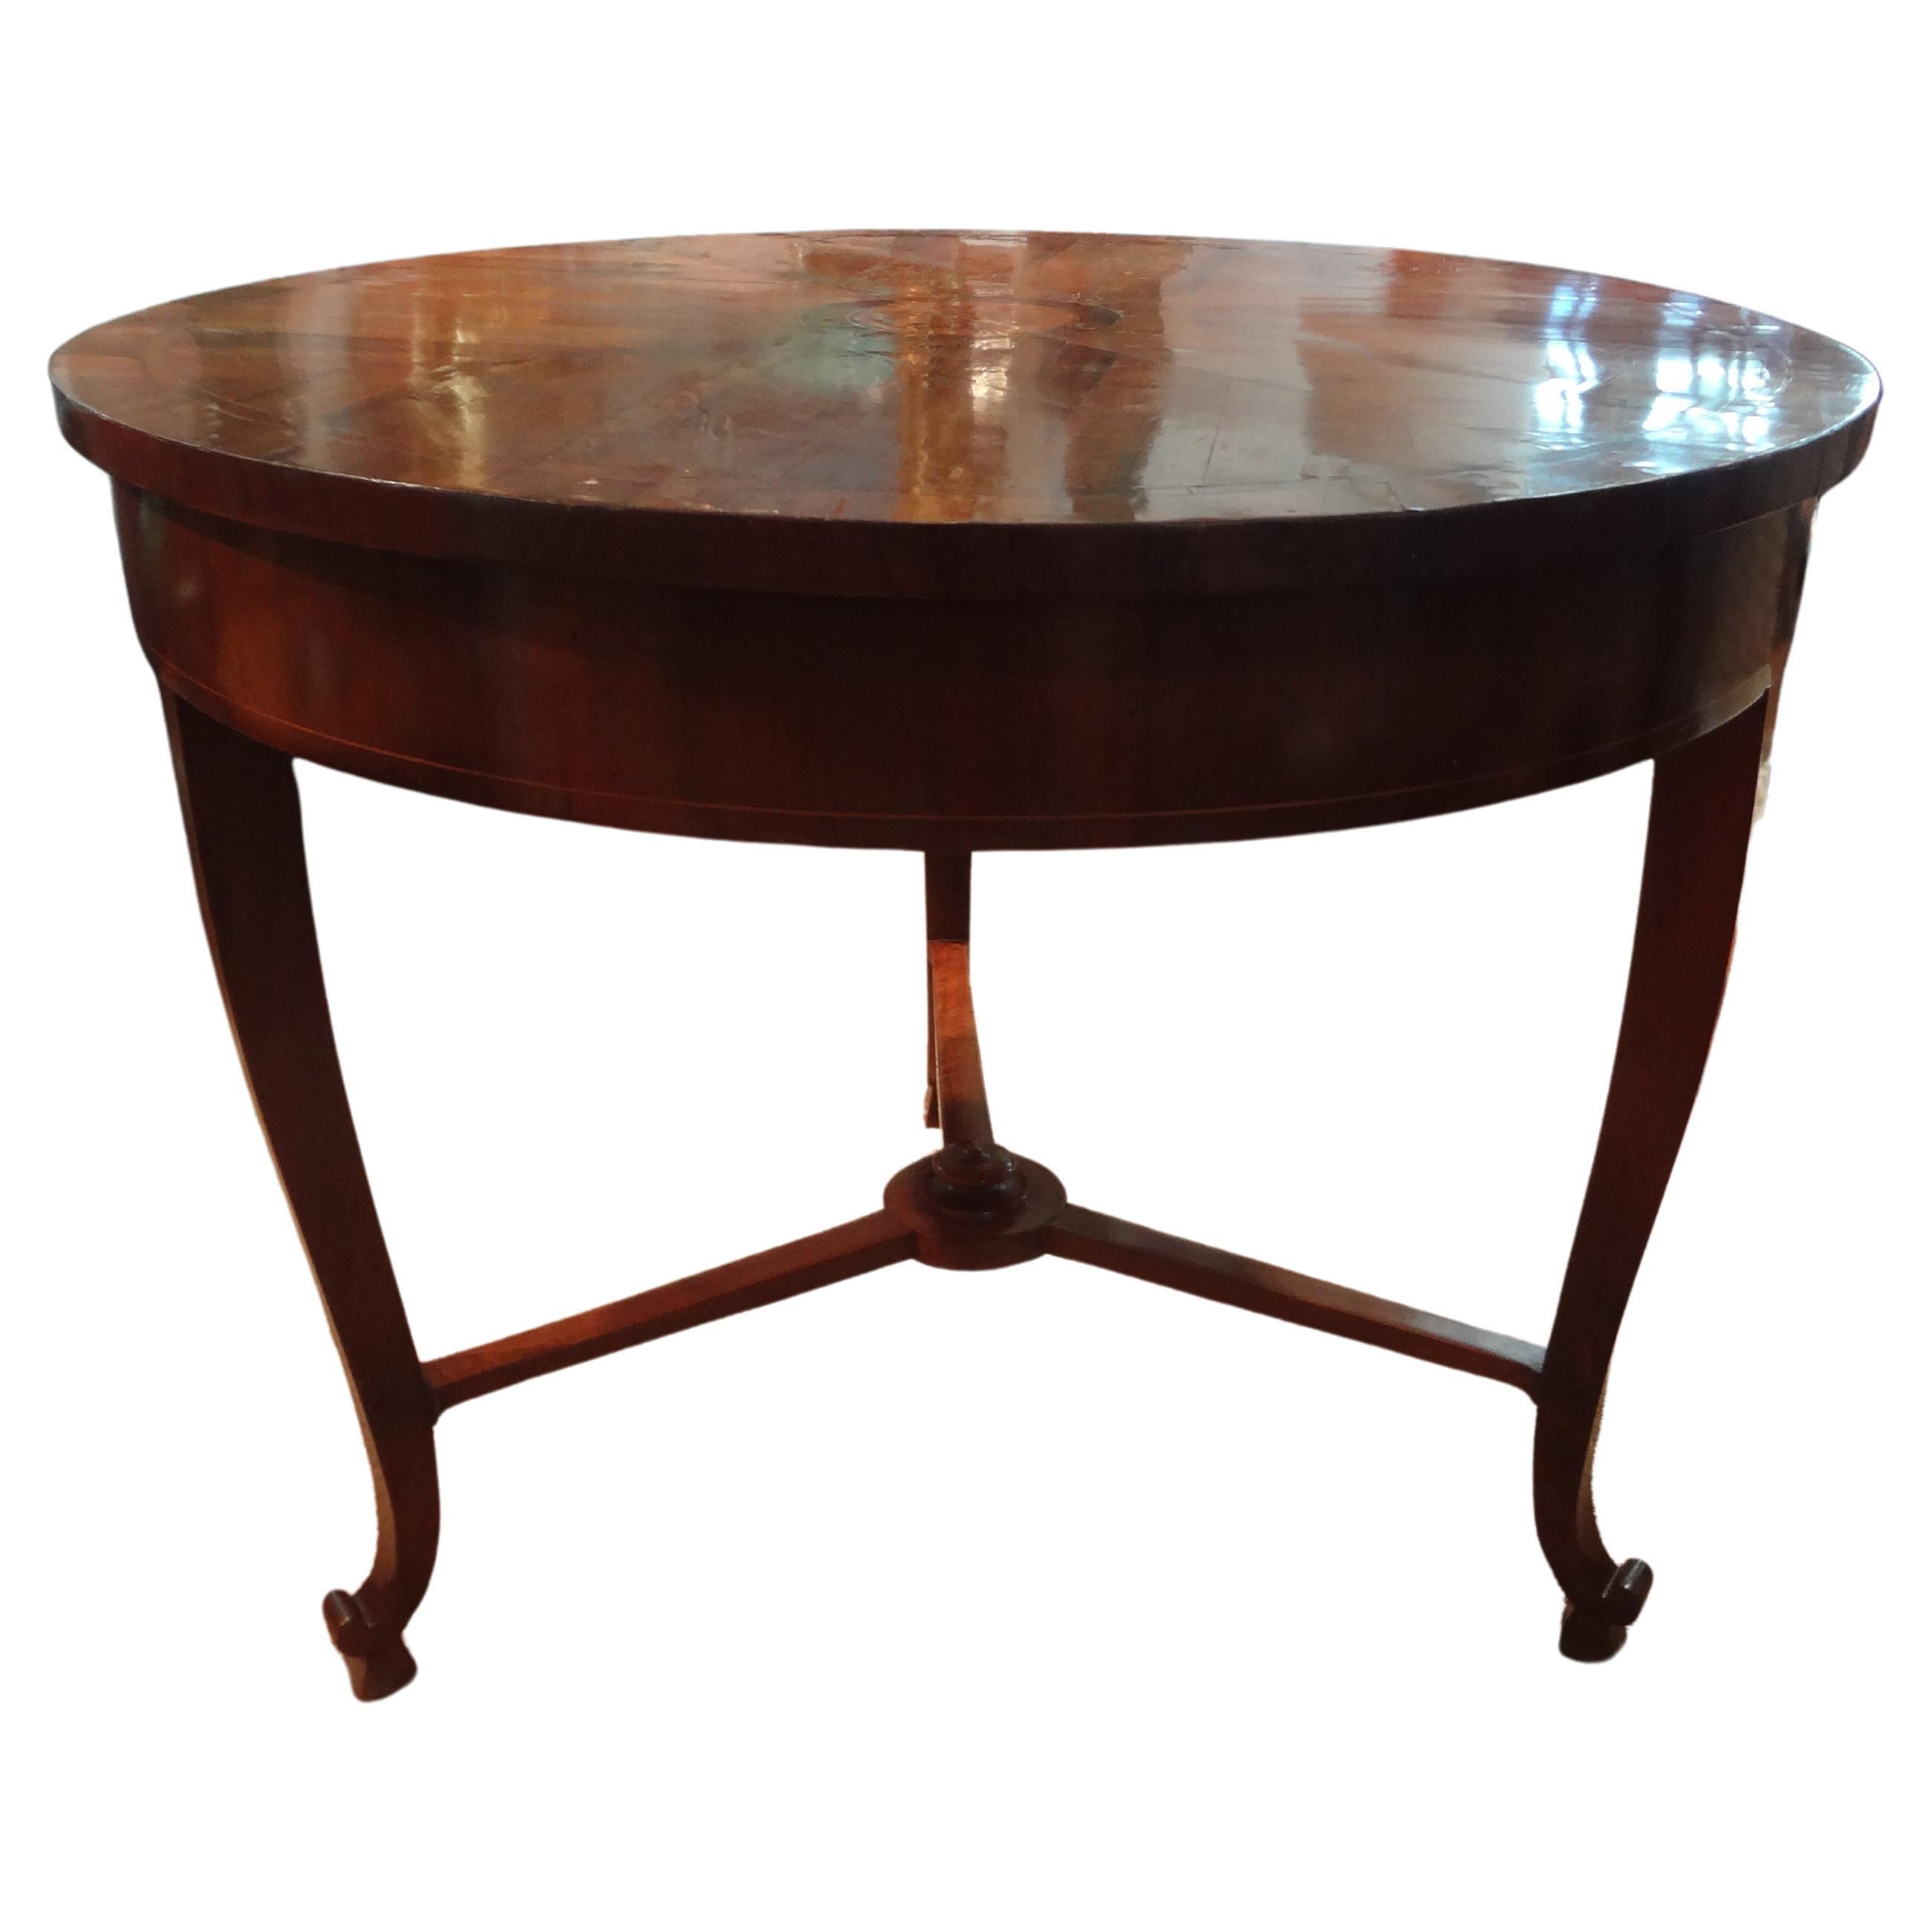 19th Century Italian Walnut Center Table Or Game Table.
This unusual antique Italian Neoclassical style walnut center table or game table has a beautiful marquetry central inlaid  design, a drawer and three legs.
A versatile table that can be used